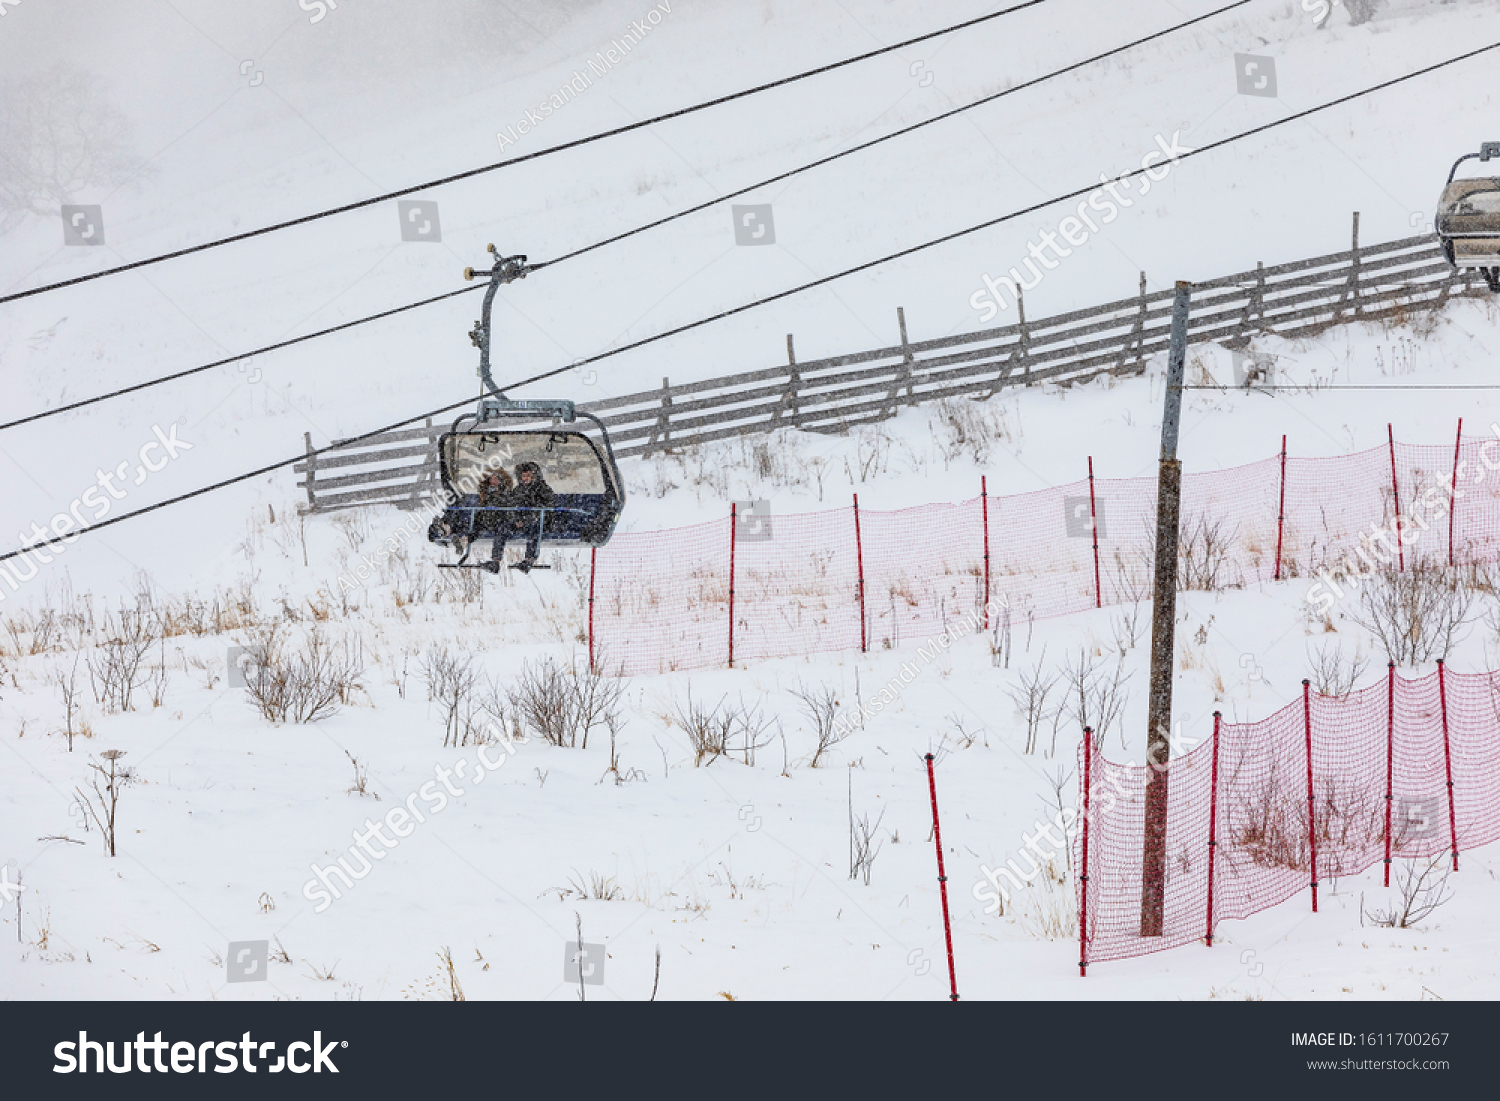 People climbing a cable car downhill in a snowfall #1611700267